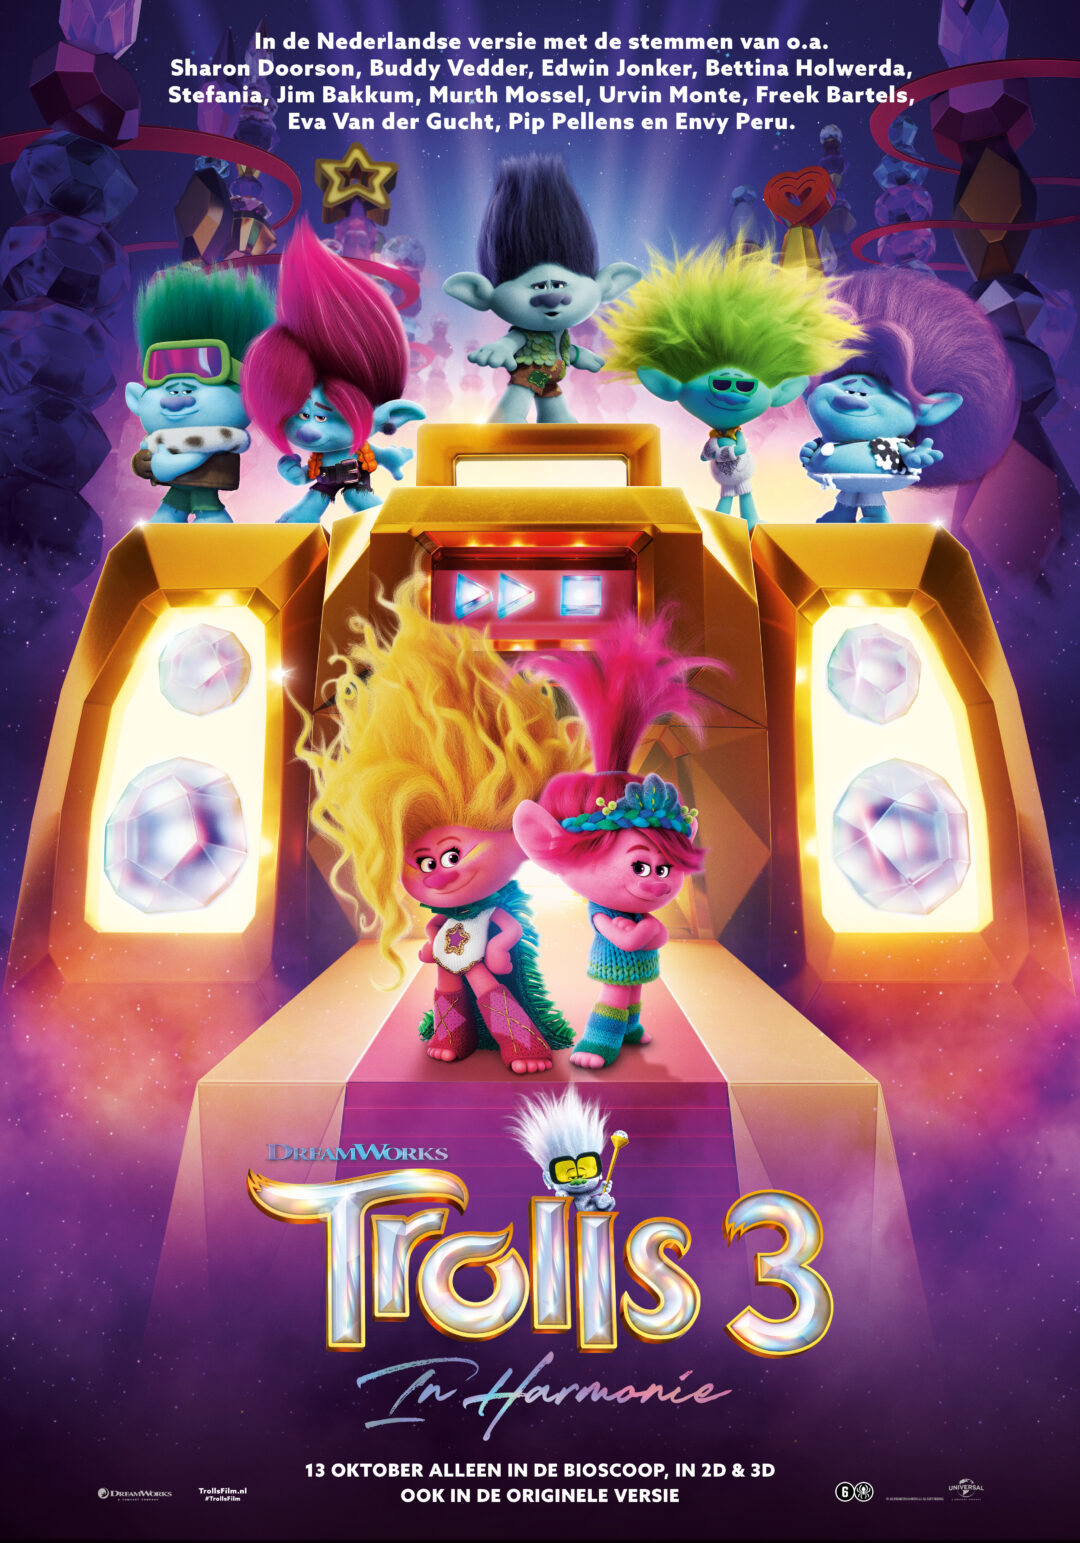 Trolls-3-in-Harmonie_ps_1_jpg_sd-high_Copyright-2023-DreamWorks-Animation-All-Rights-Reserved.jpg